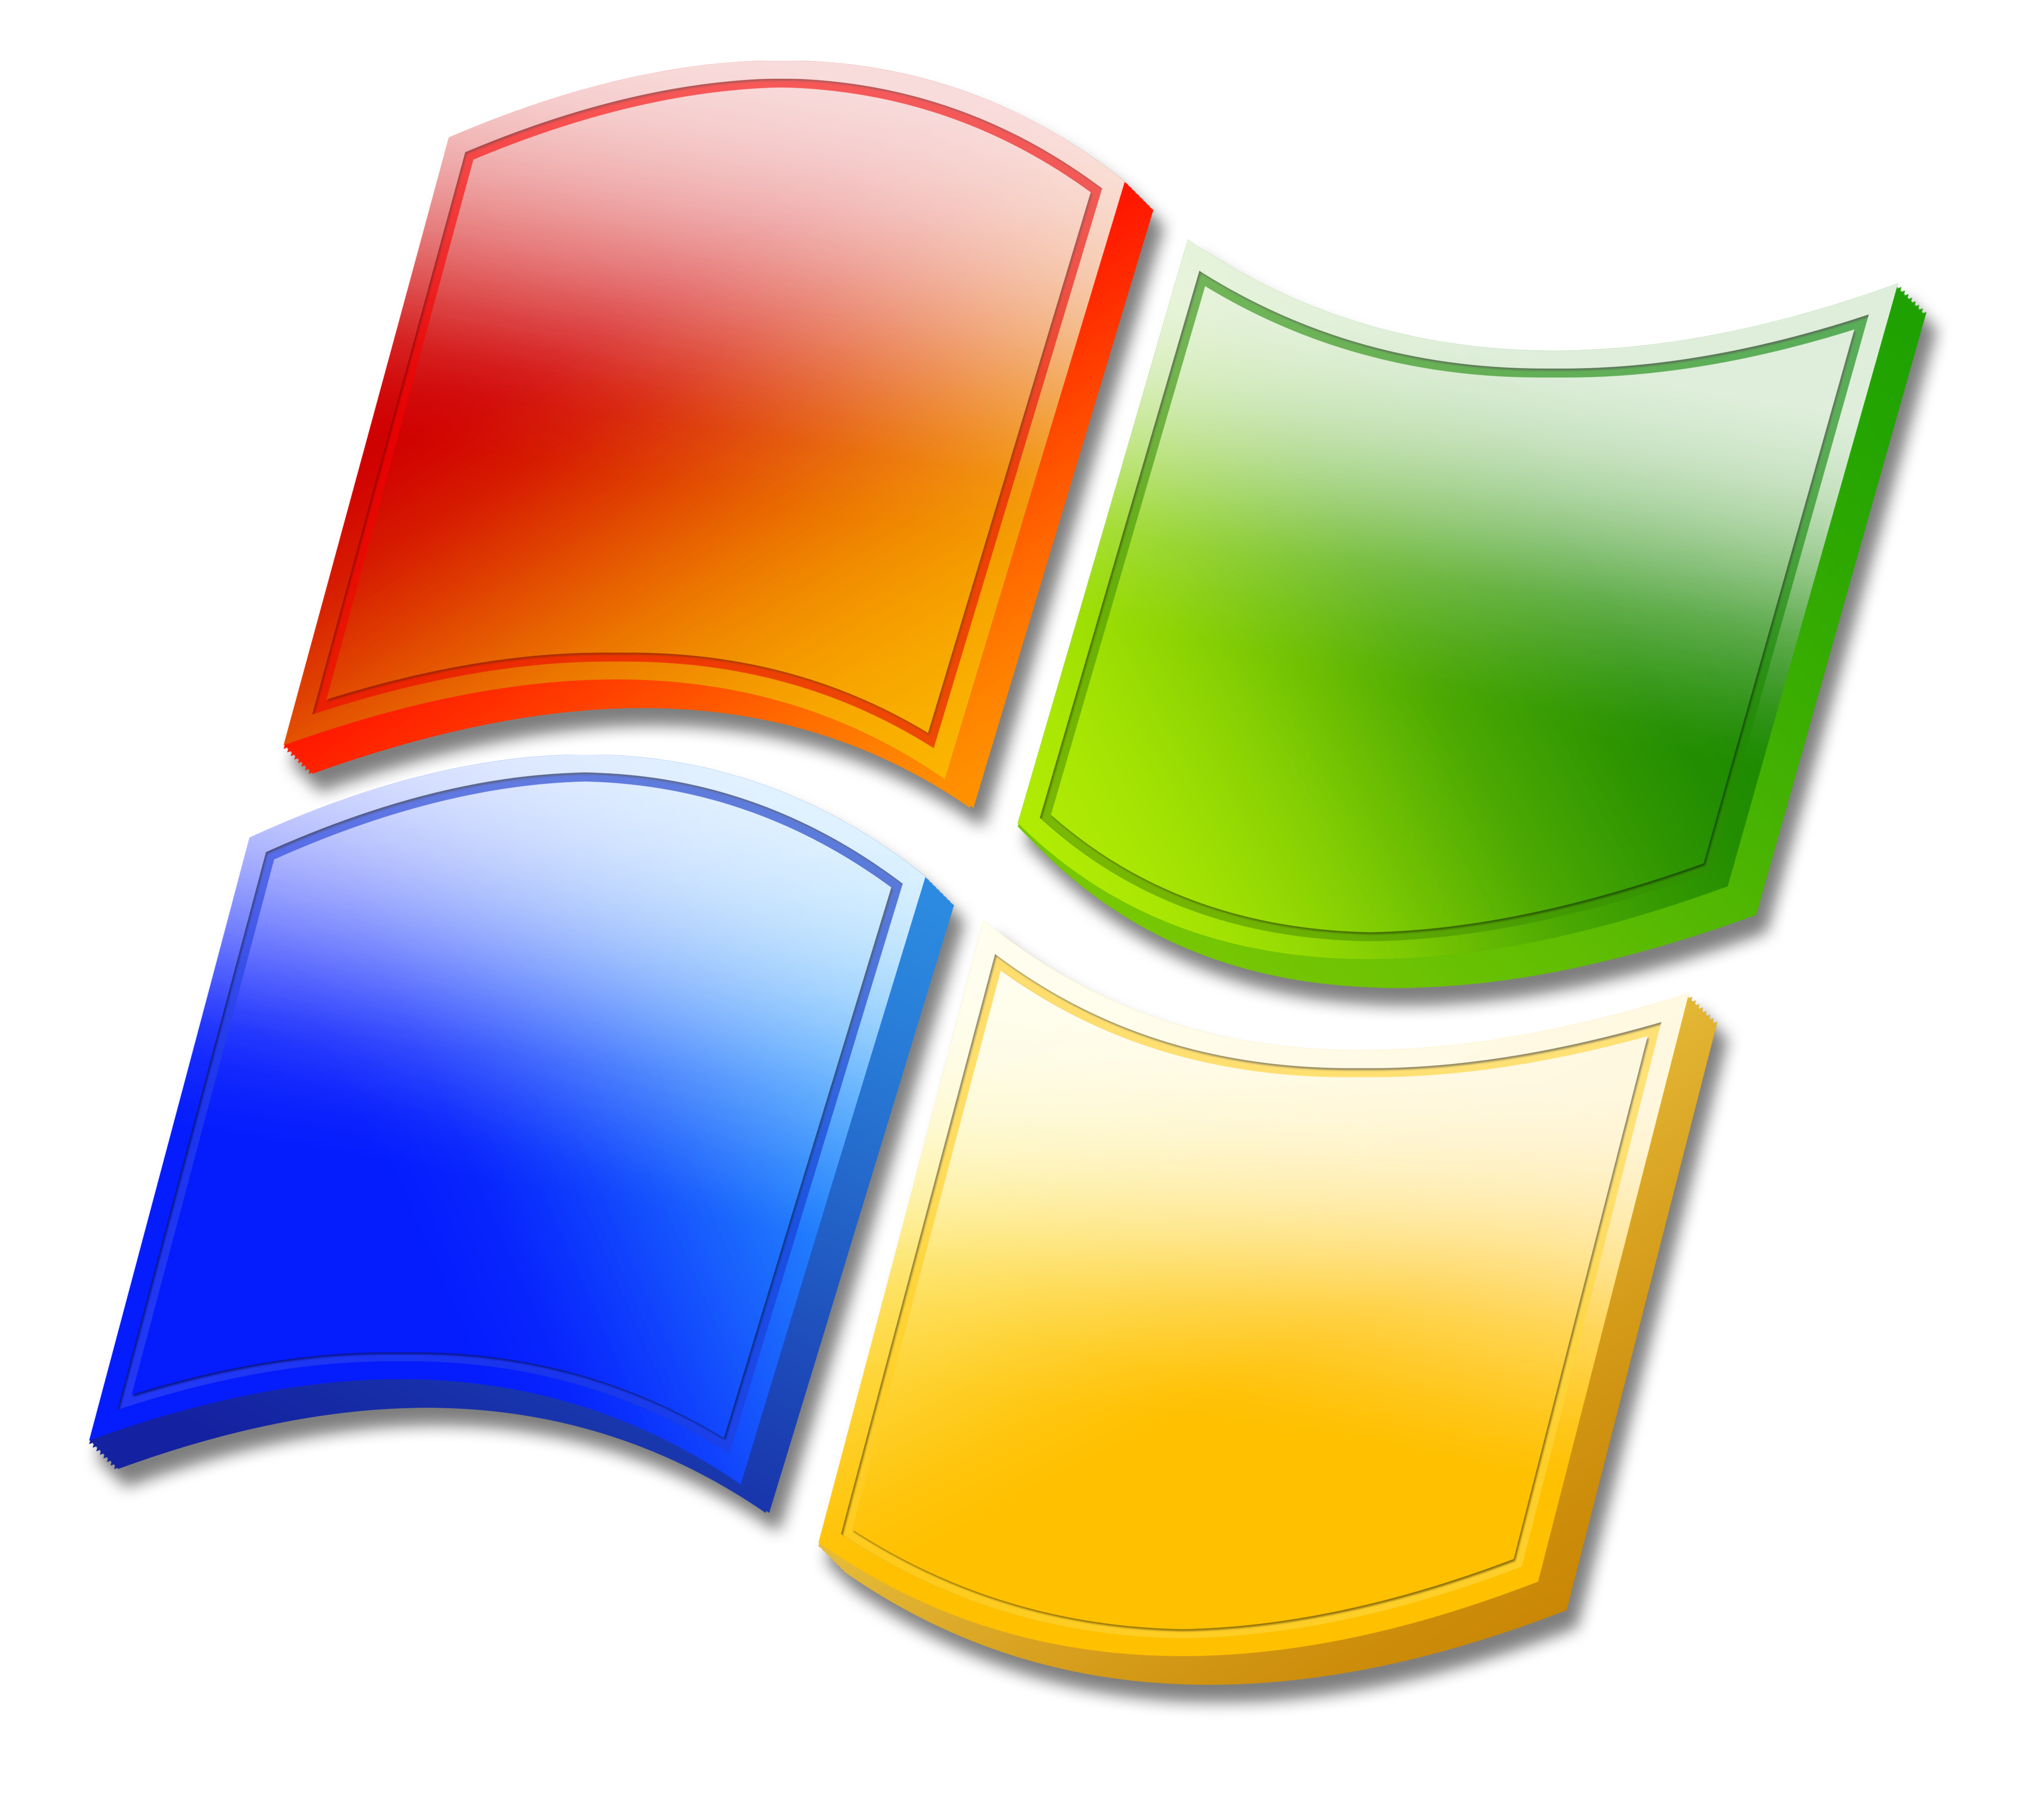 windows clipart library - photo #36